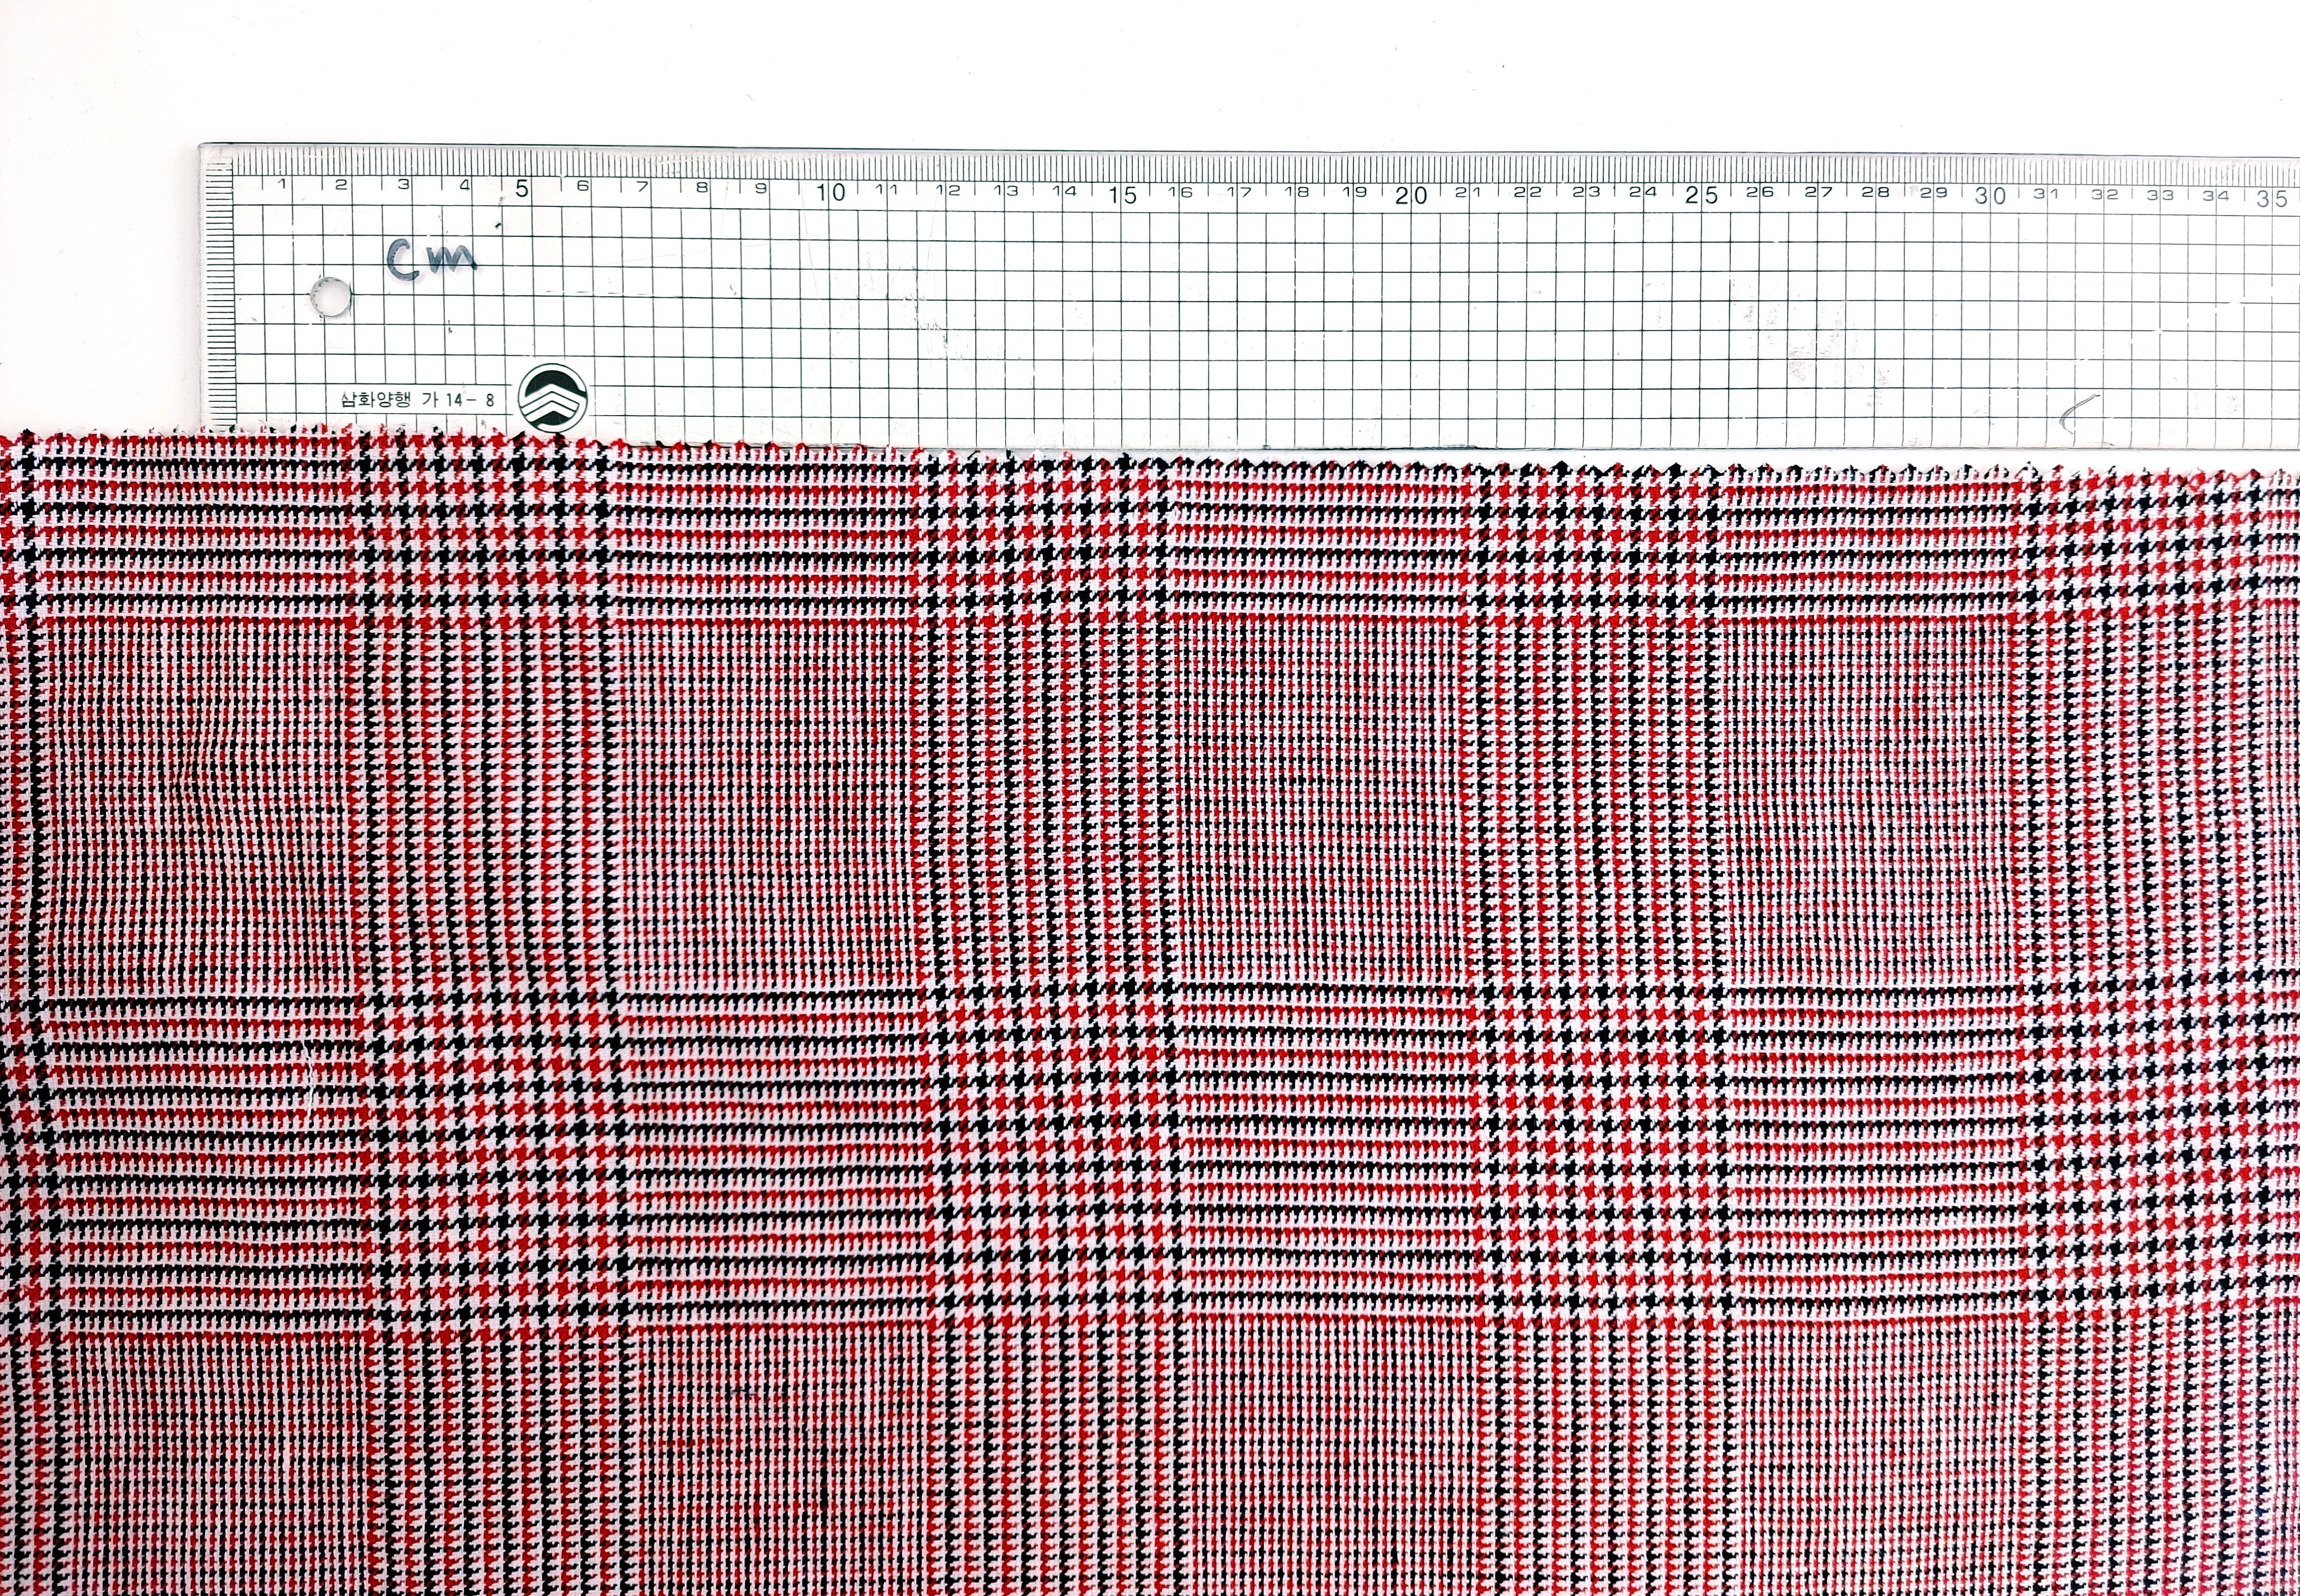 Tricolor Symphony: Linen Cotton Twill Glen Plaid in Medium Weight – White, Red, and Black 6759